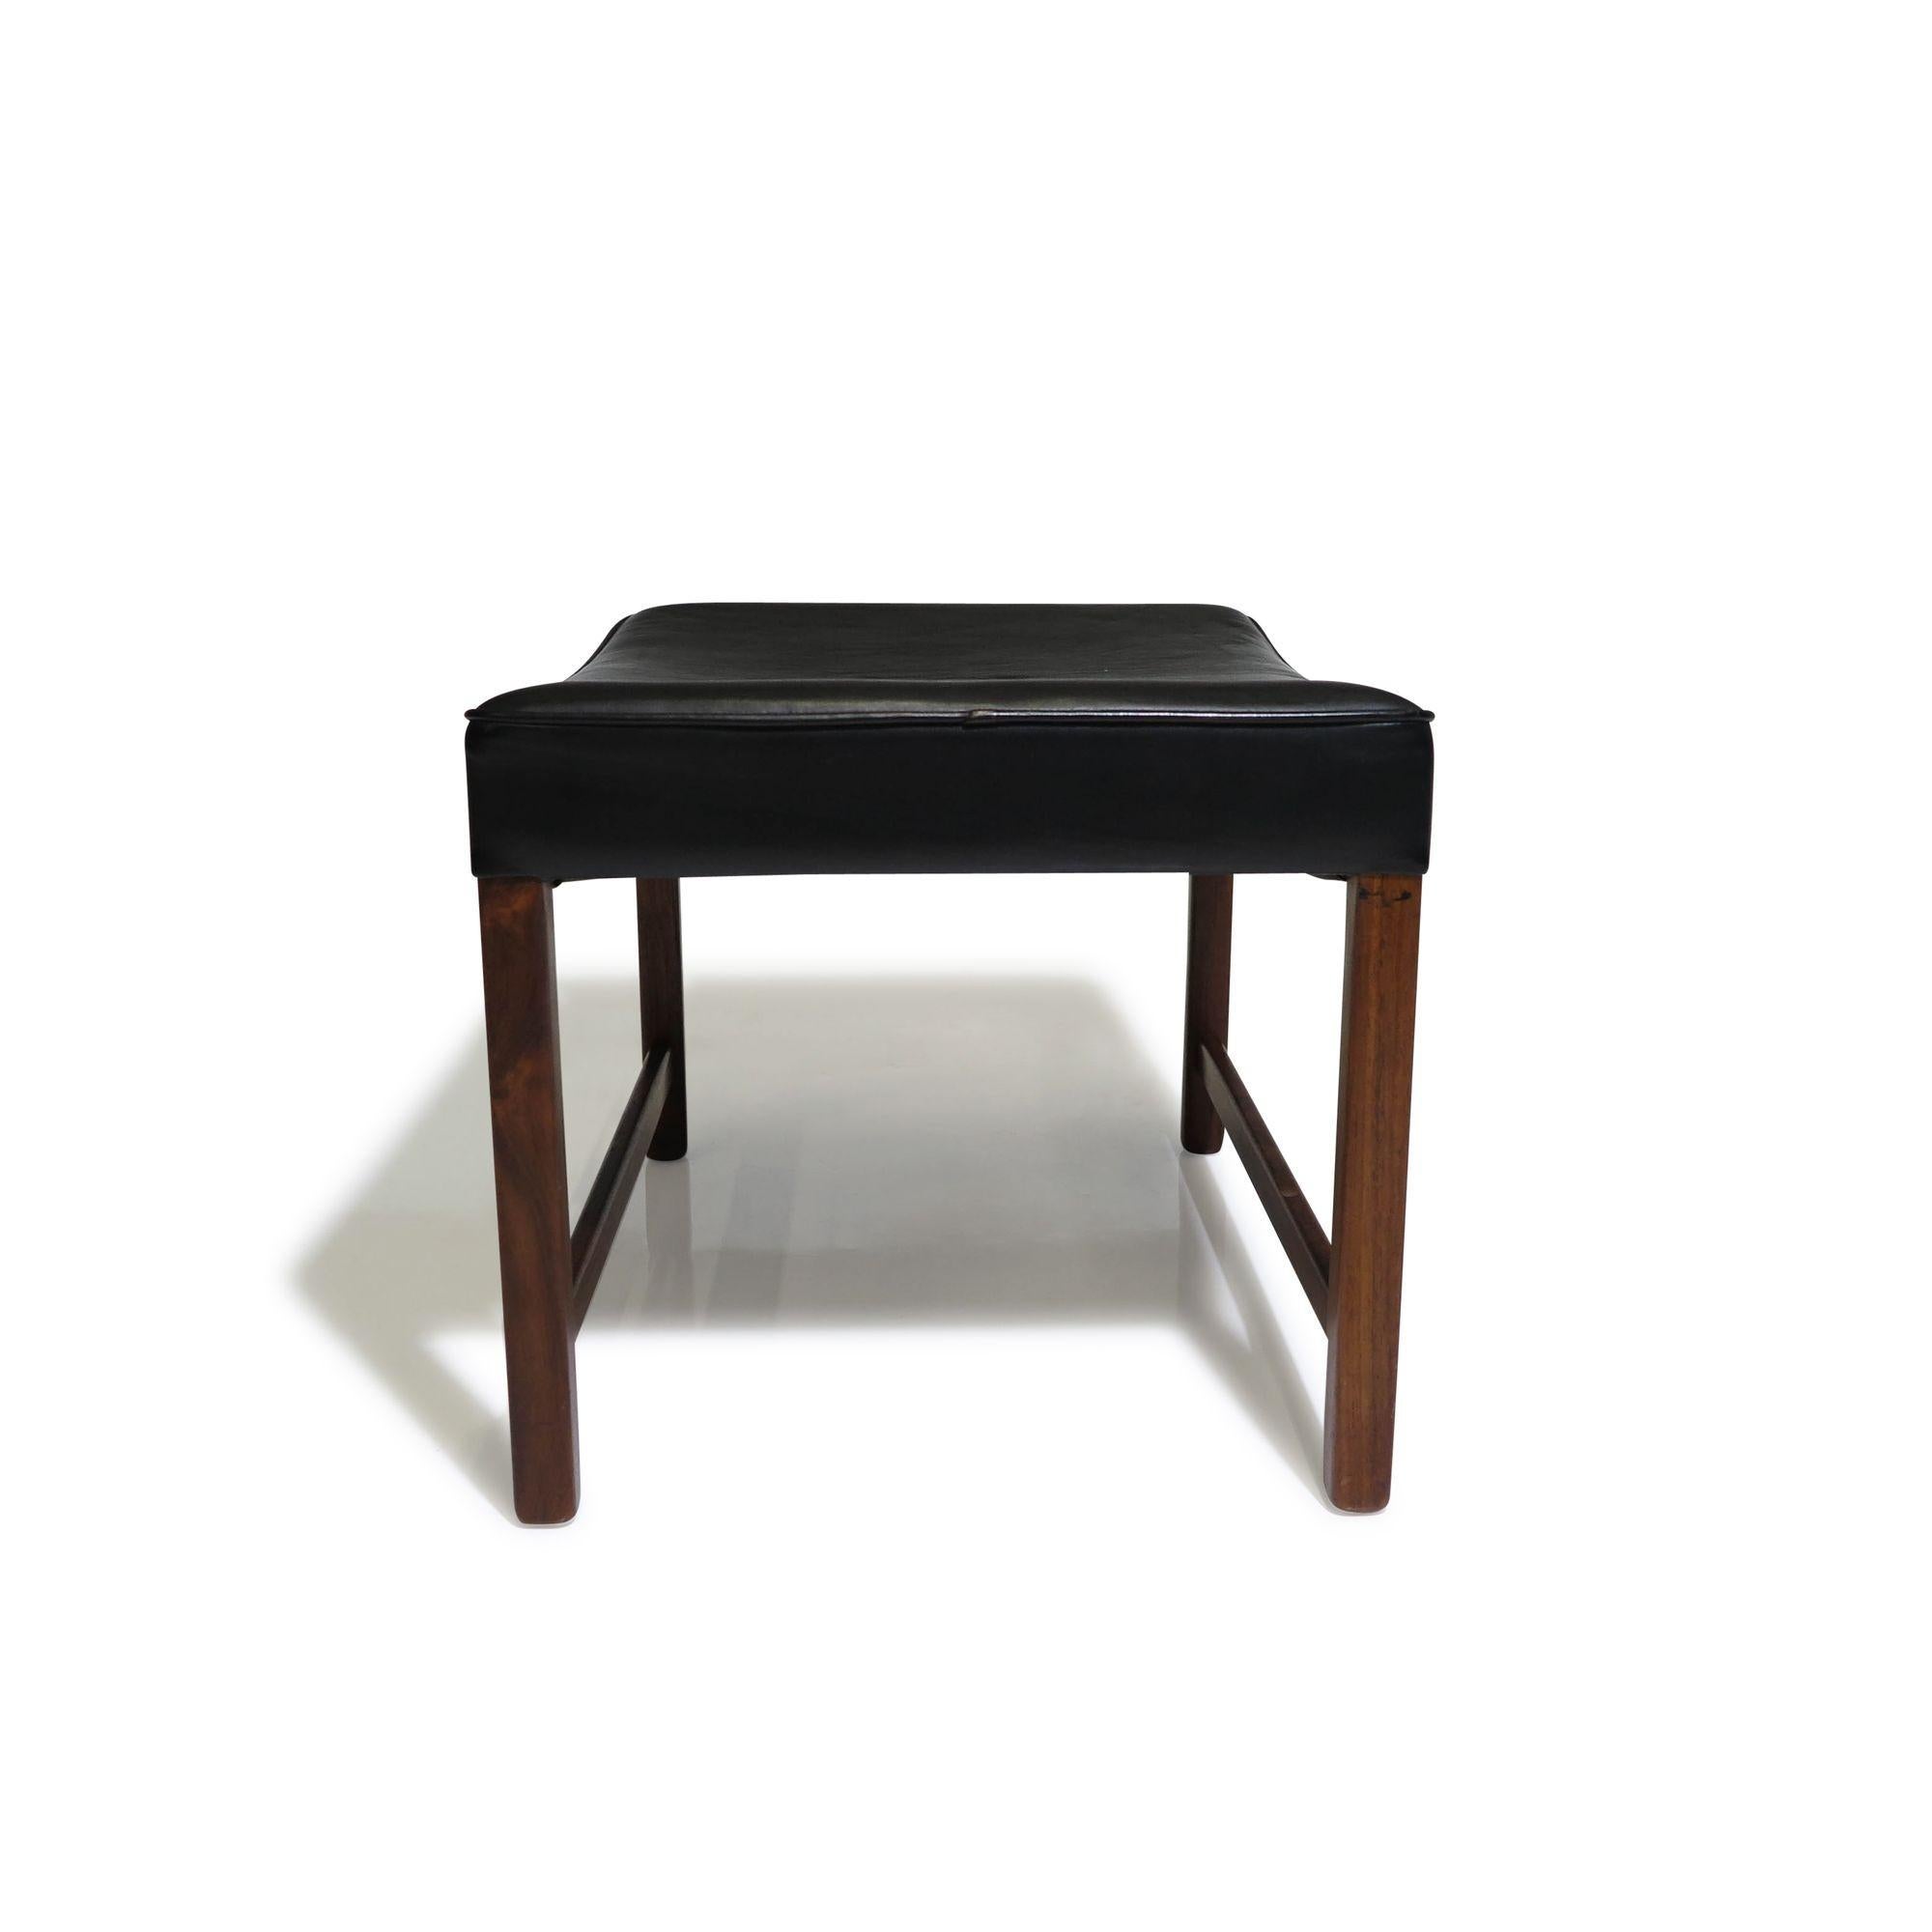 Solid rosewood framed ottoman by Fredrik Kayser for Vatne Møbler, Norway. The bench is upholstered in the original black leather.
Measurements
W 22,25’’ x D 17’’ x H 15,5’’
Seat Height 14,75''